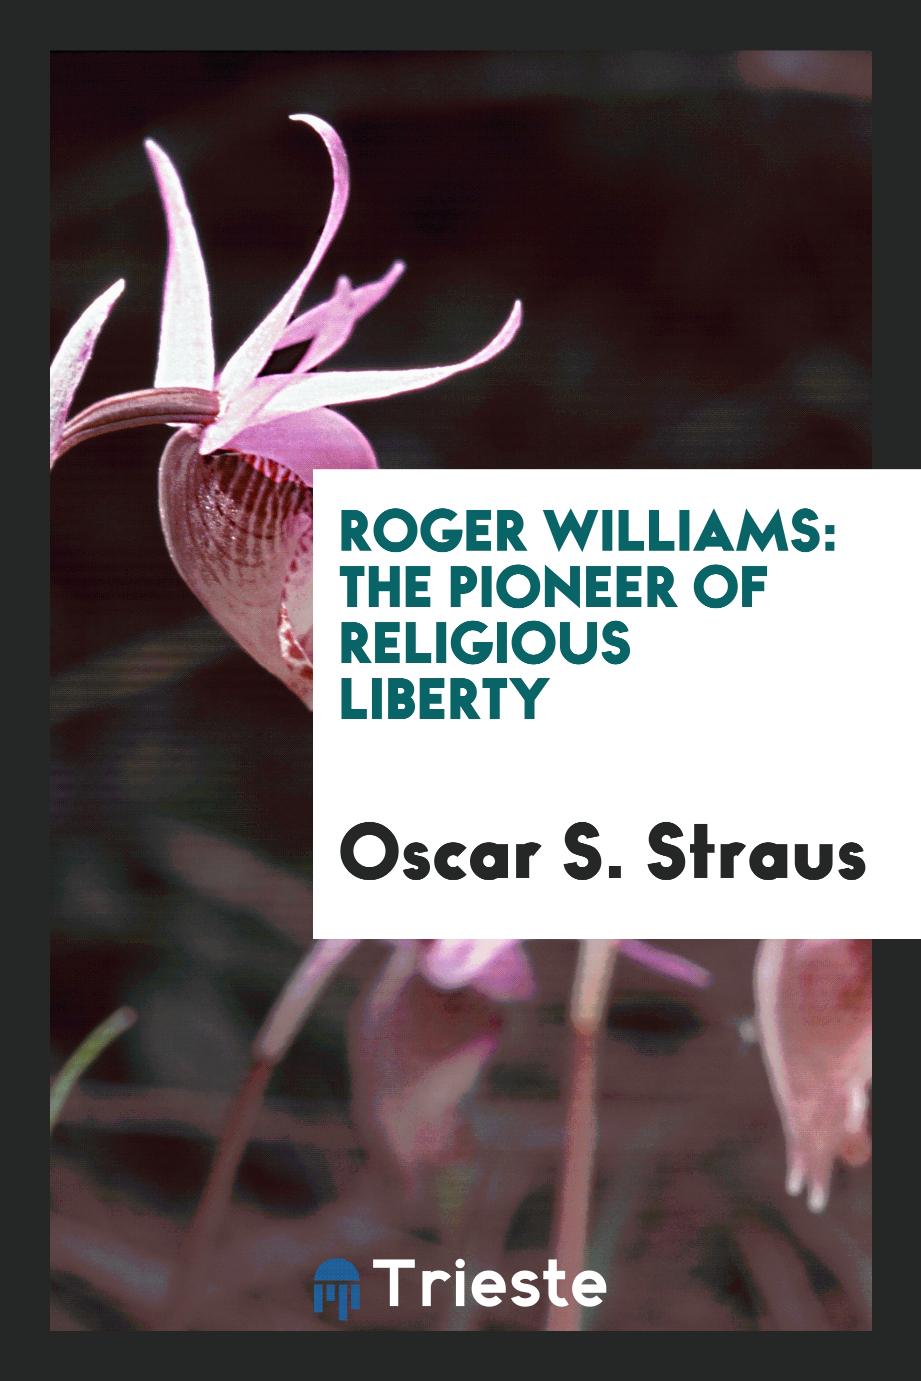 Roger Williams: the pioneer of religious liberty